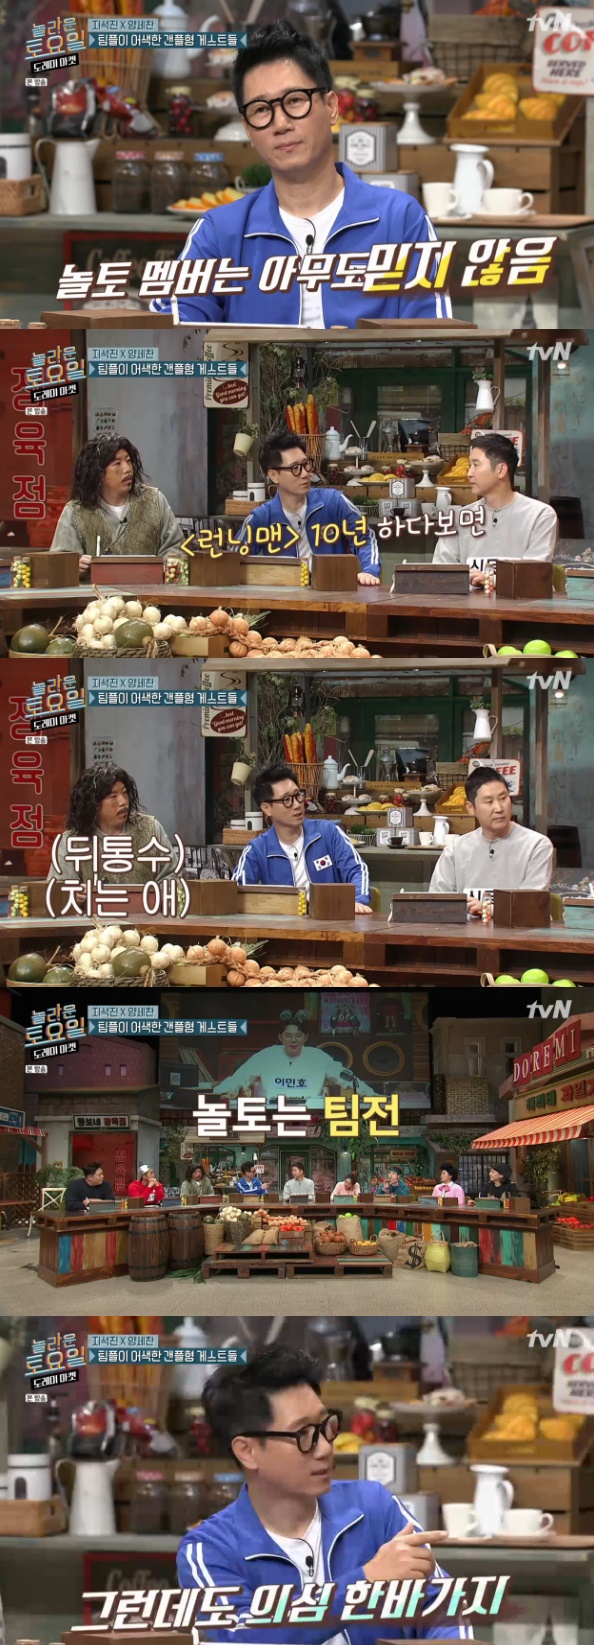 Ji Suk-jin revealed that he was live with Of Heart disease because of Running Man.On January 18th TVN Amazing Saturday - Doremi Market, comedian Ji Suk-jin said, SBS Running Man is live with Of Heart disease for 10 years.MC Boom said, Ji Suk-jin said that no one can trust Amazing Saturday - Doremi Market members.Ji Suk-jin replied, If you have a Running Man for 10 years, you will have an Of Heart disease. There are many children who are backing up because it is a solo exhibition.han jung-won